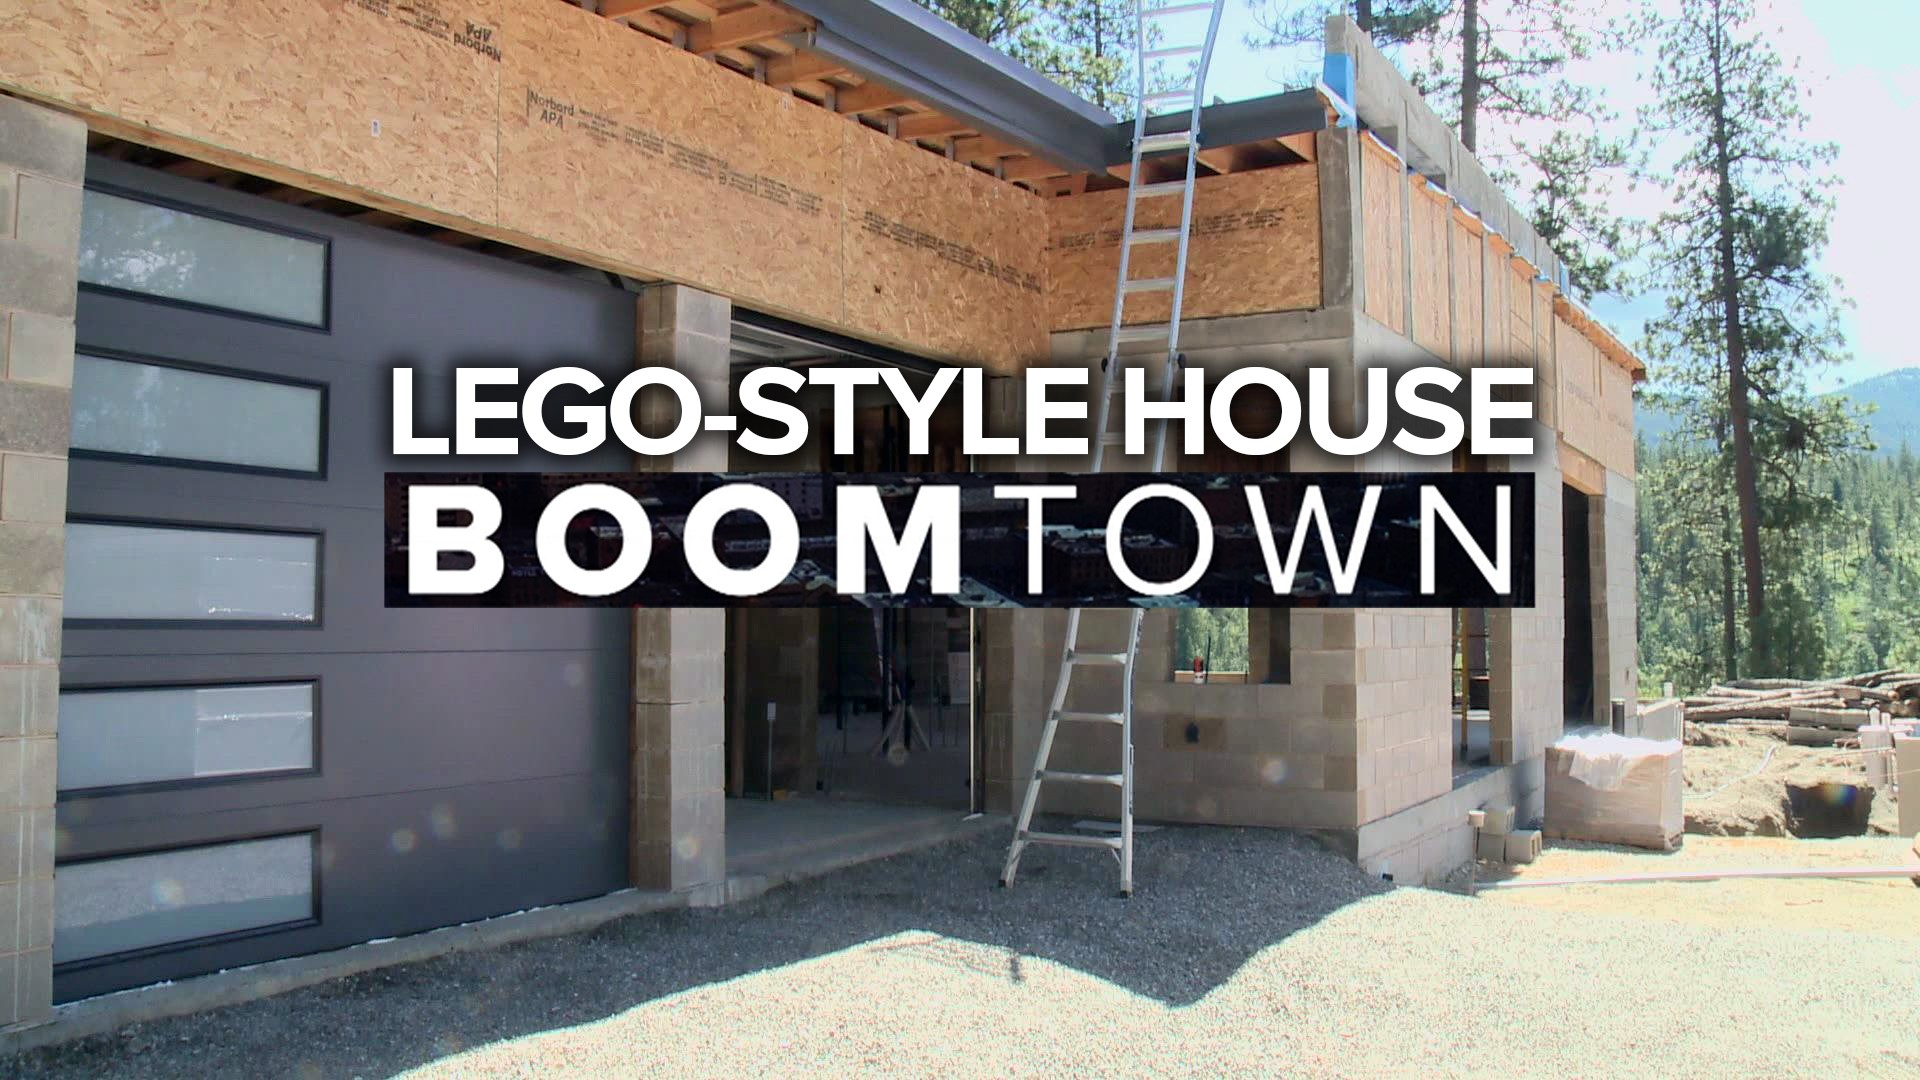 A Liberty Lake man is building his home using a new, cheaper technique that is similar to building with Lego. | Boomtown